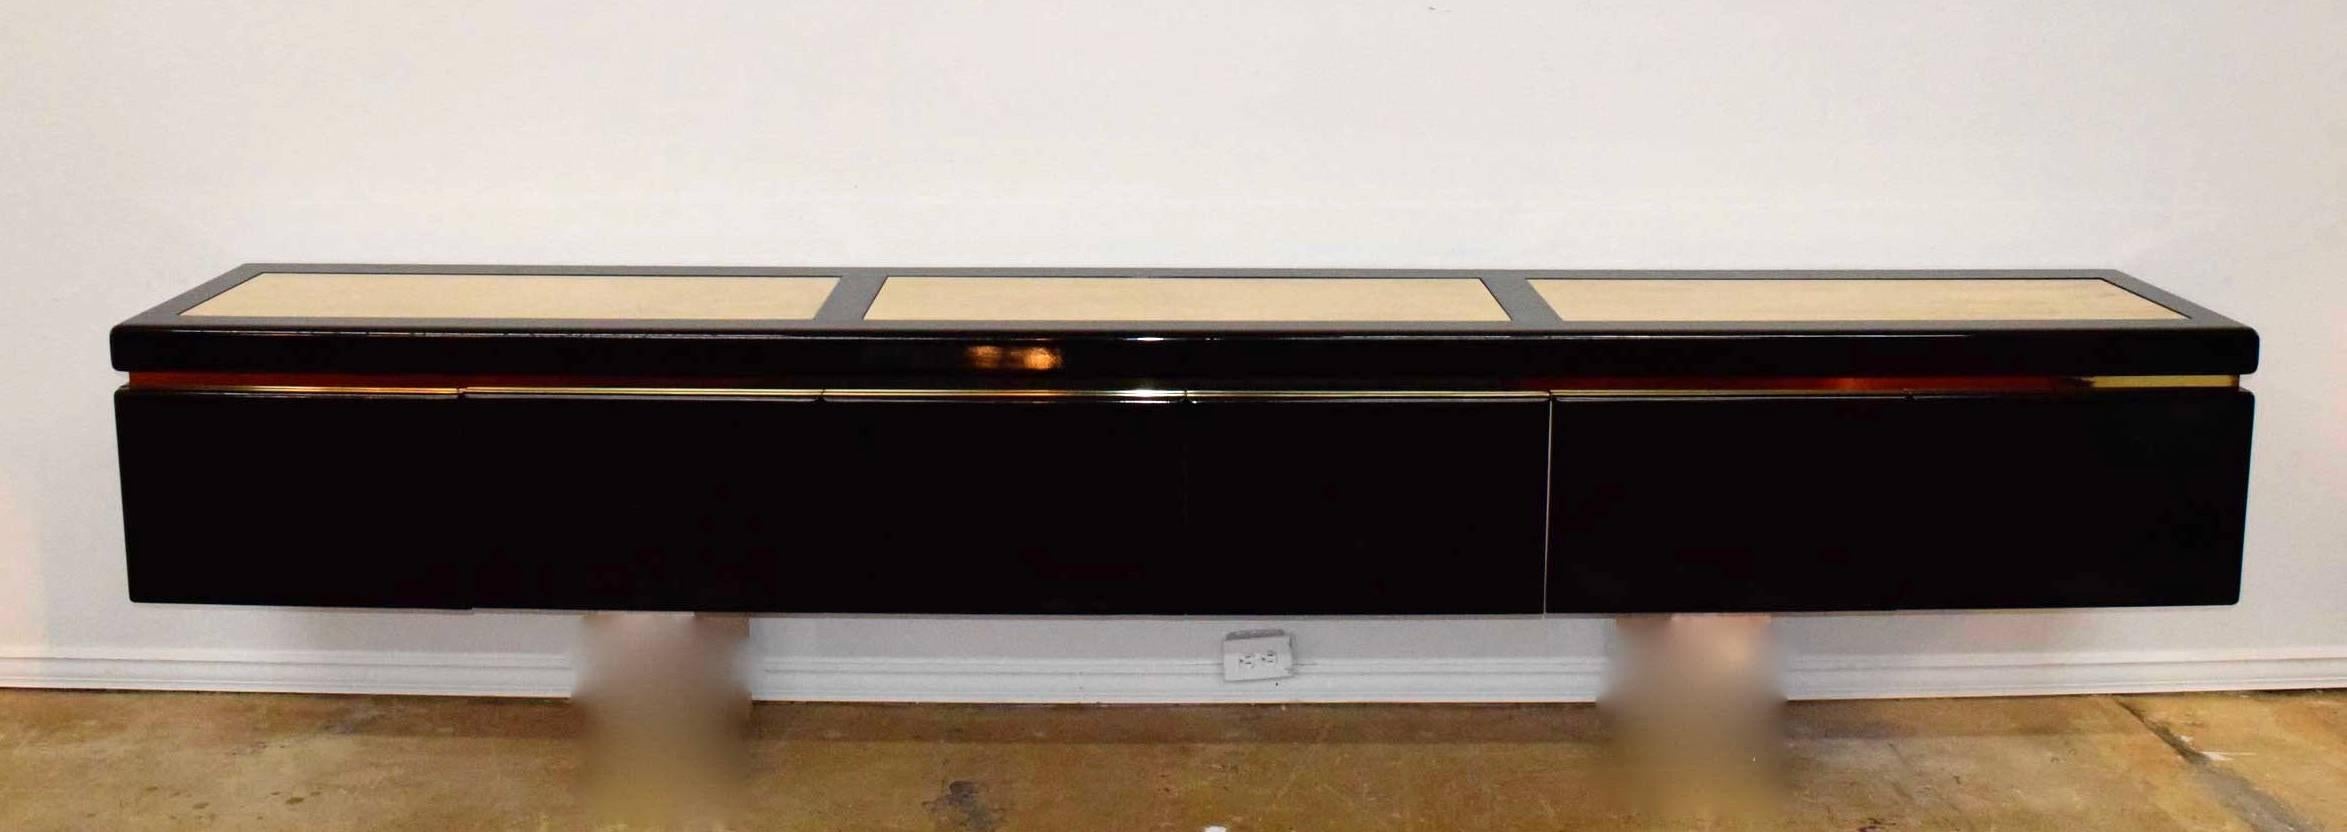 Custom-made in the 1990s. Black lacquer with brass trim and inlaid travertine. Six doors in total, conceal four pull-out drawers (one is missing in the photo but we have located) and shelf storage. Plenty of good storage. Travertine is in very nice